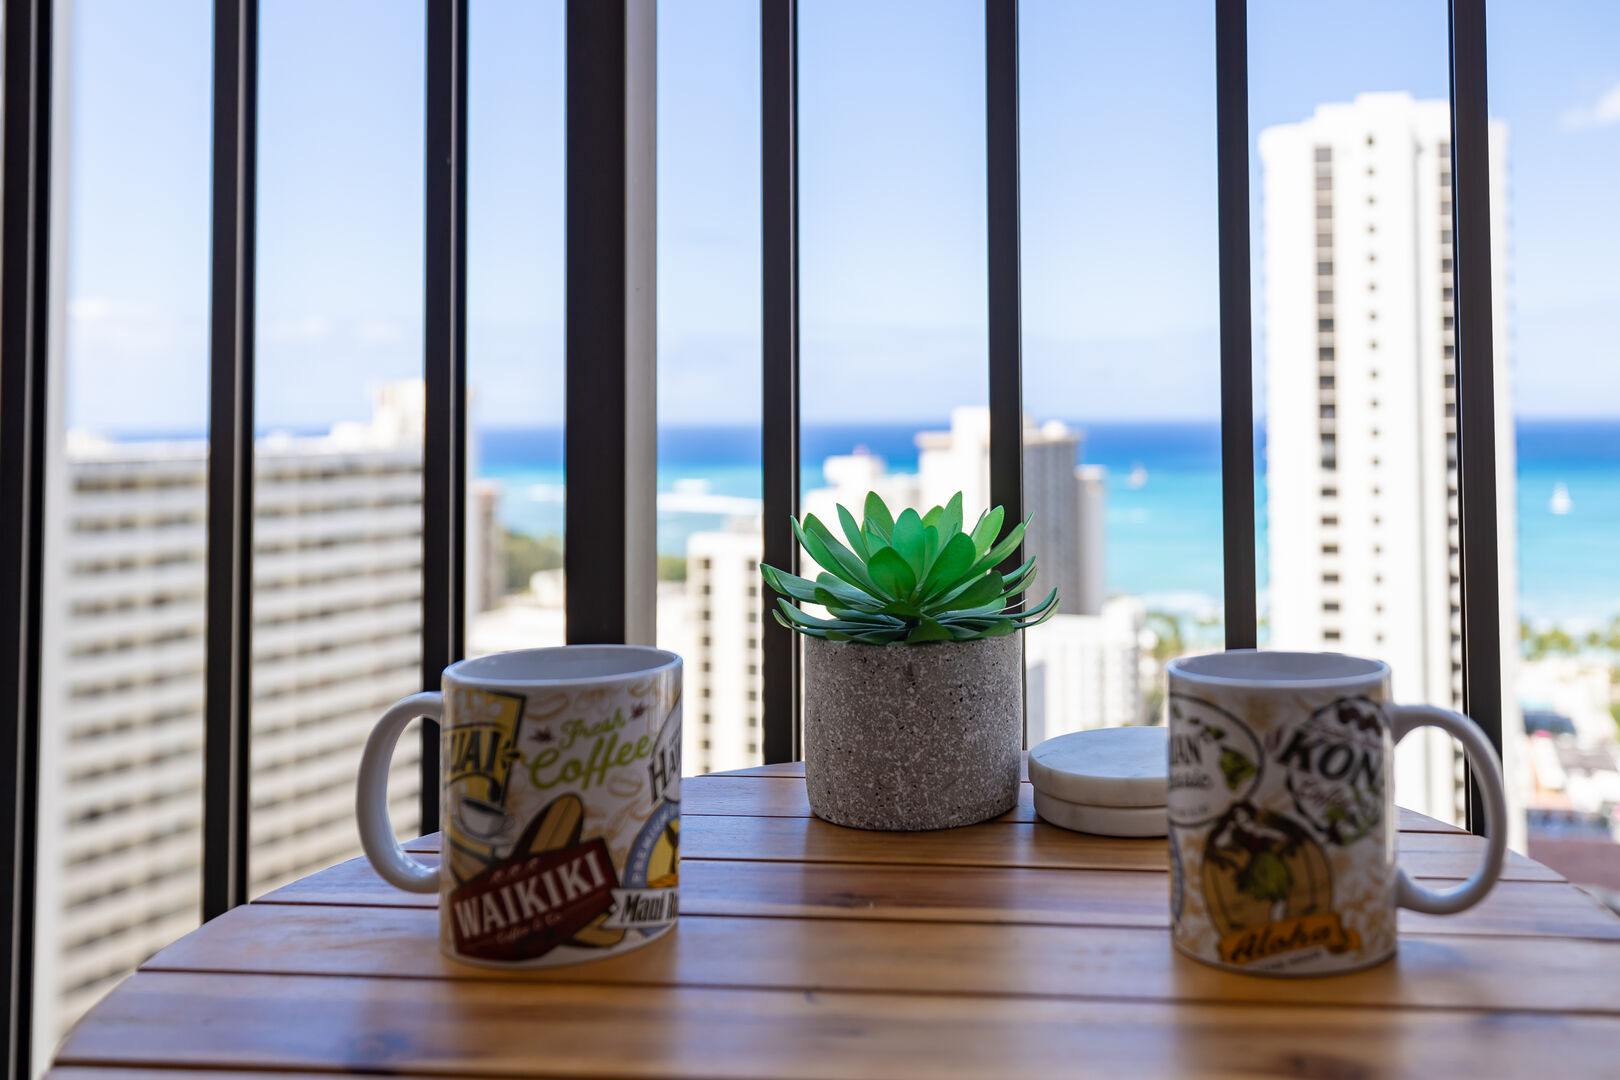 Enjoy your coffee in the morning on the lanai